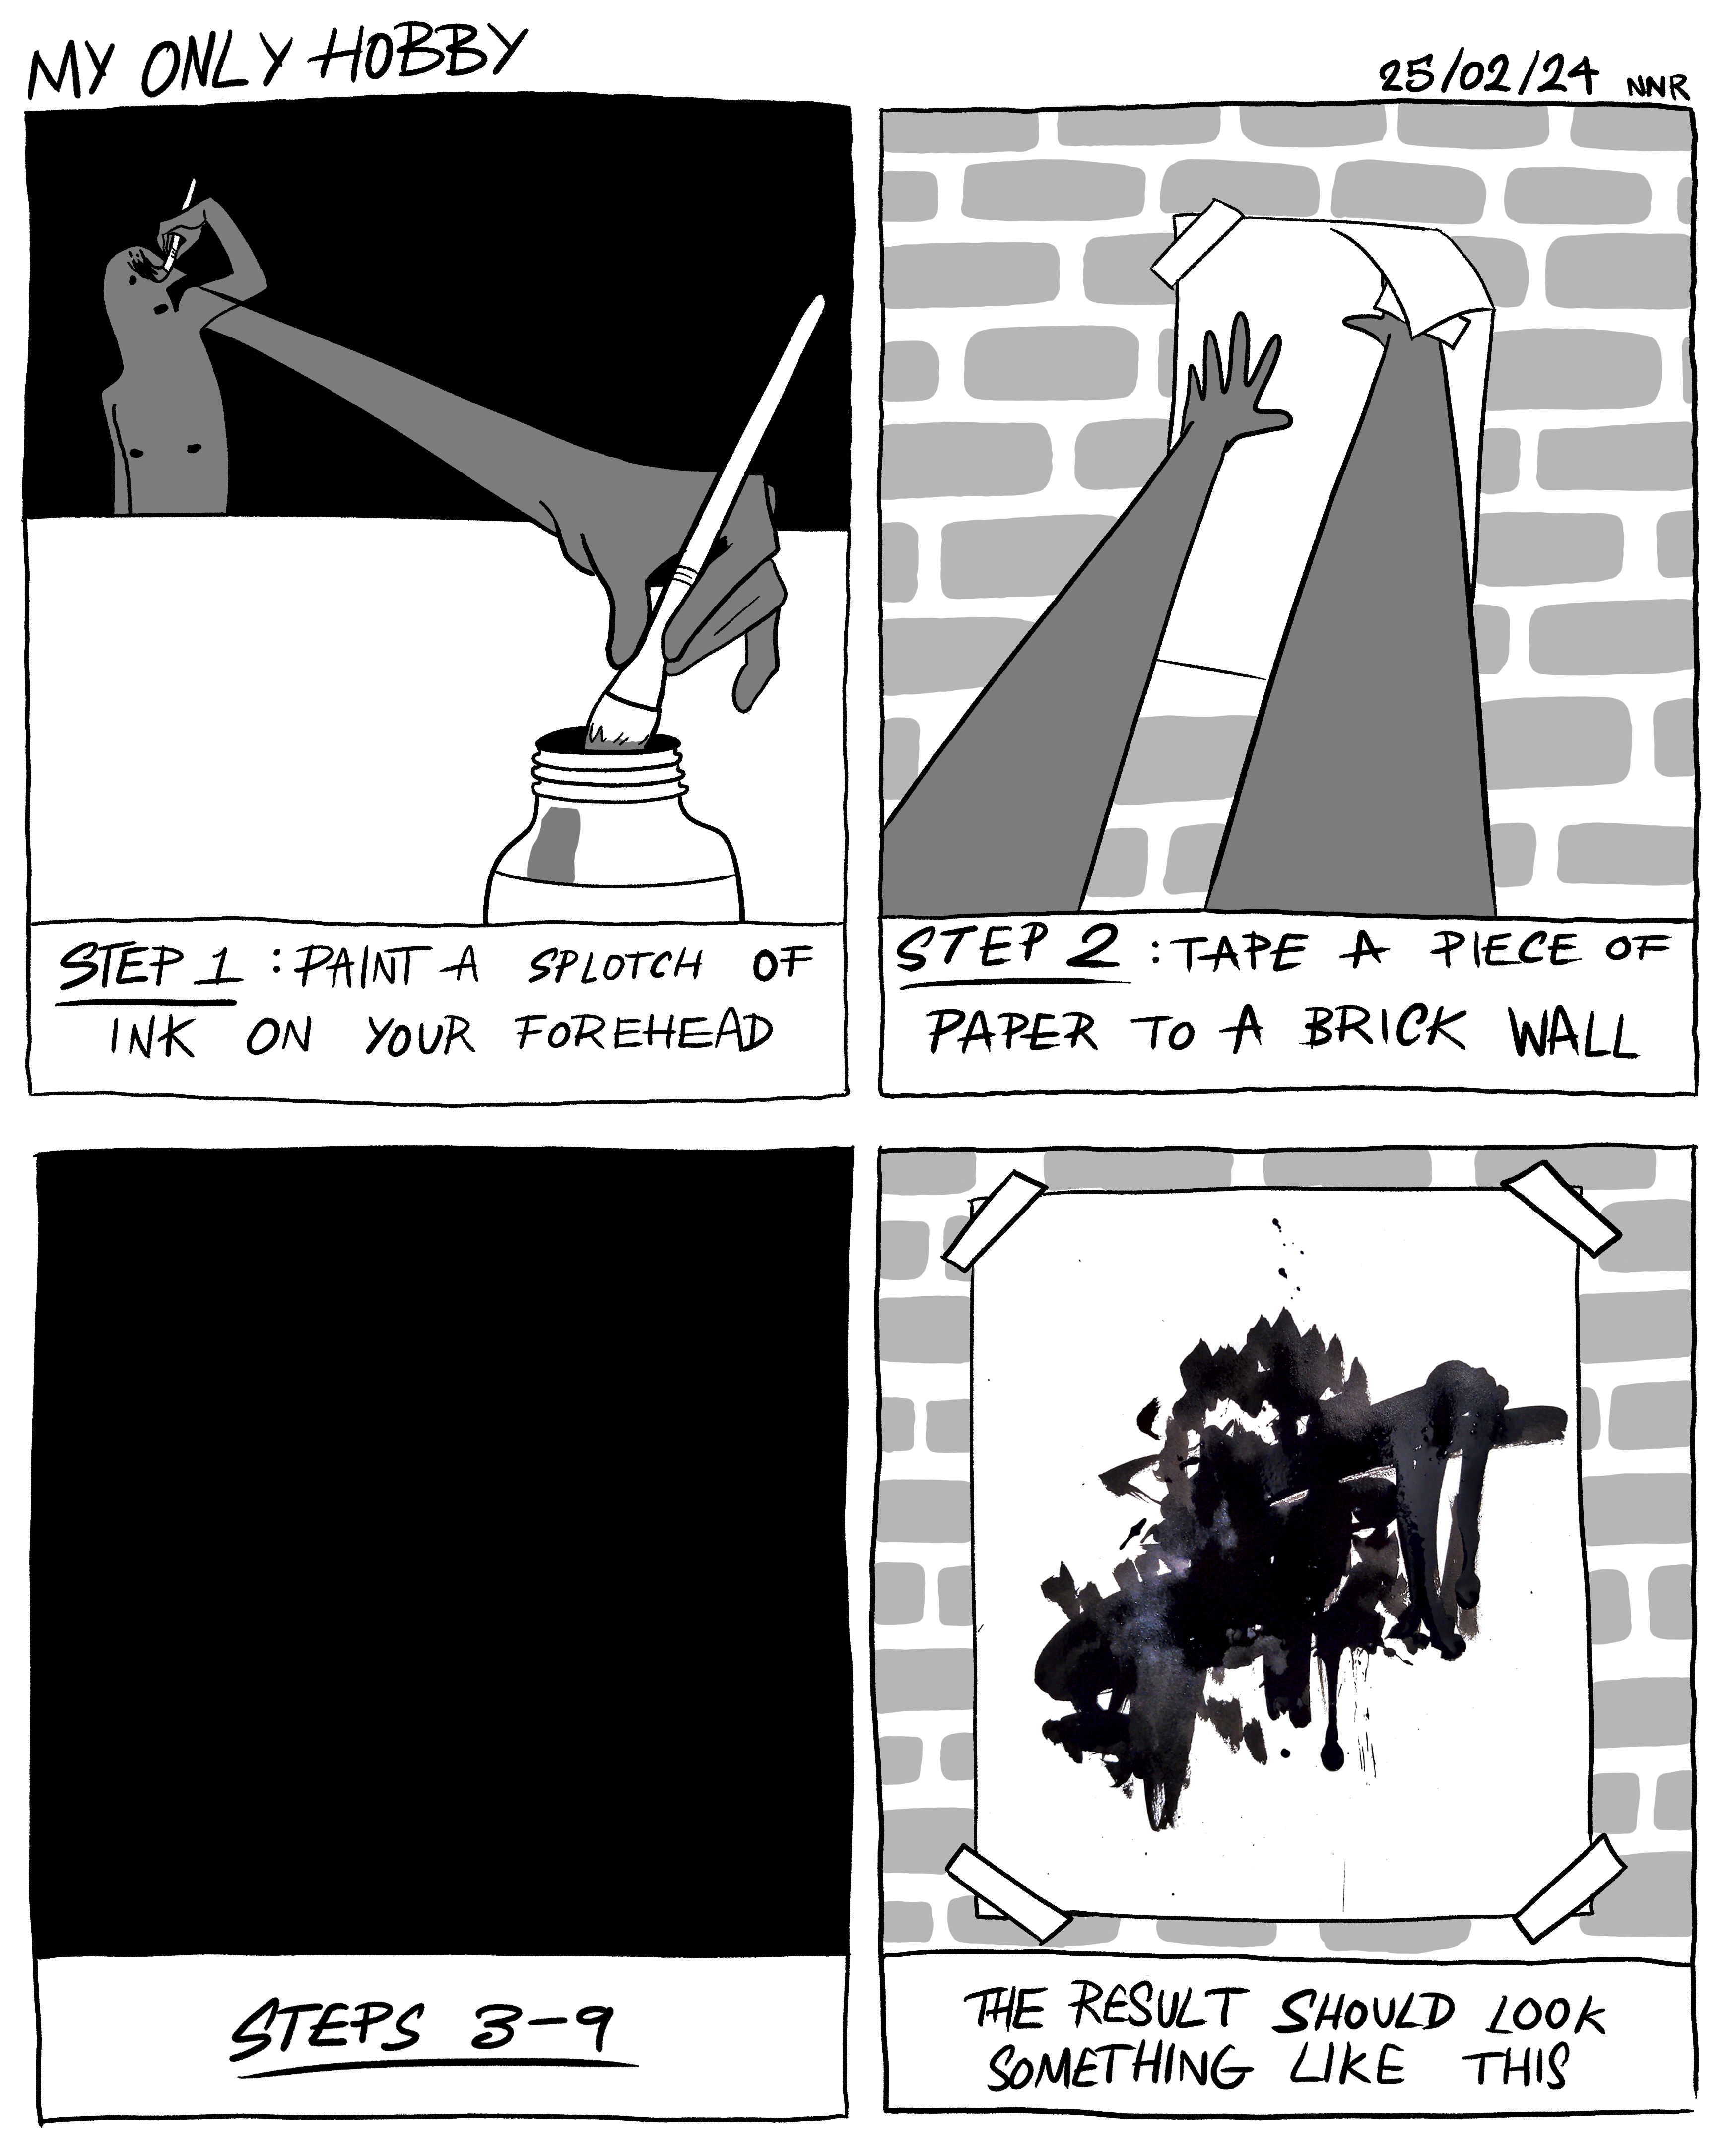 A digital greyscale 4 panel comic titled 'My only hobby'. The first panel is of a cartoon naked dark skinned person dipping a paintbrush in black ink then painting a streak of black on their forehead. The caption reads 'Step one: paint a splotch of ink on your forehead'. The caption of the second panel reads 'Step two: tape a piece of paper to a brick wall', the drawing is showing the character's arms doing that. The third panel is completely black. The caption reads 'Steps 3-9'. The final panel is of the same piece of paper from panel 3, now covered in bold black ink splotches and streaks. The caption reads 'The result should look something like this'